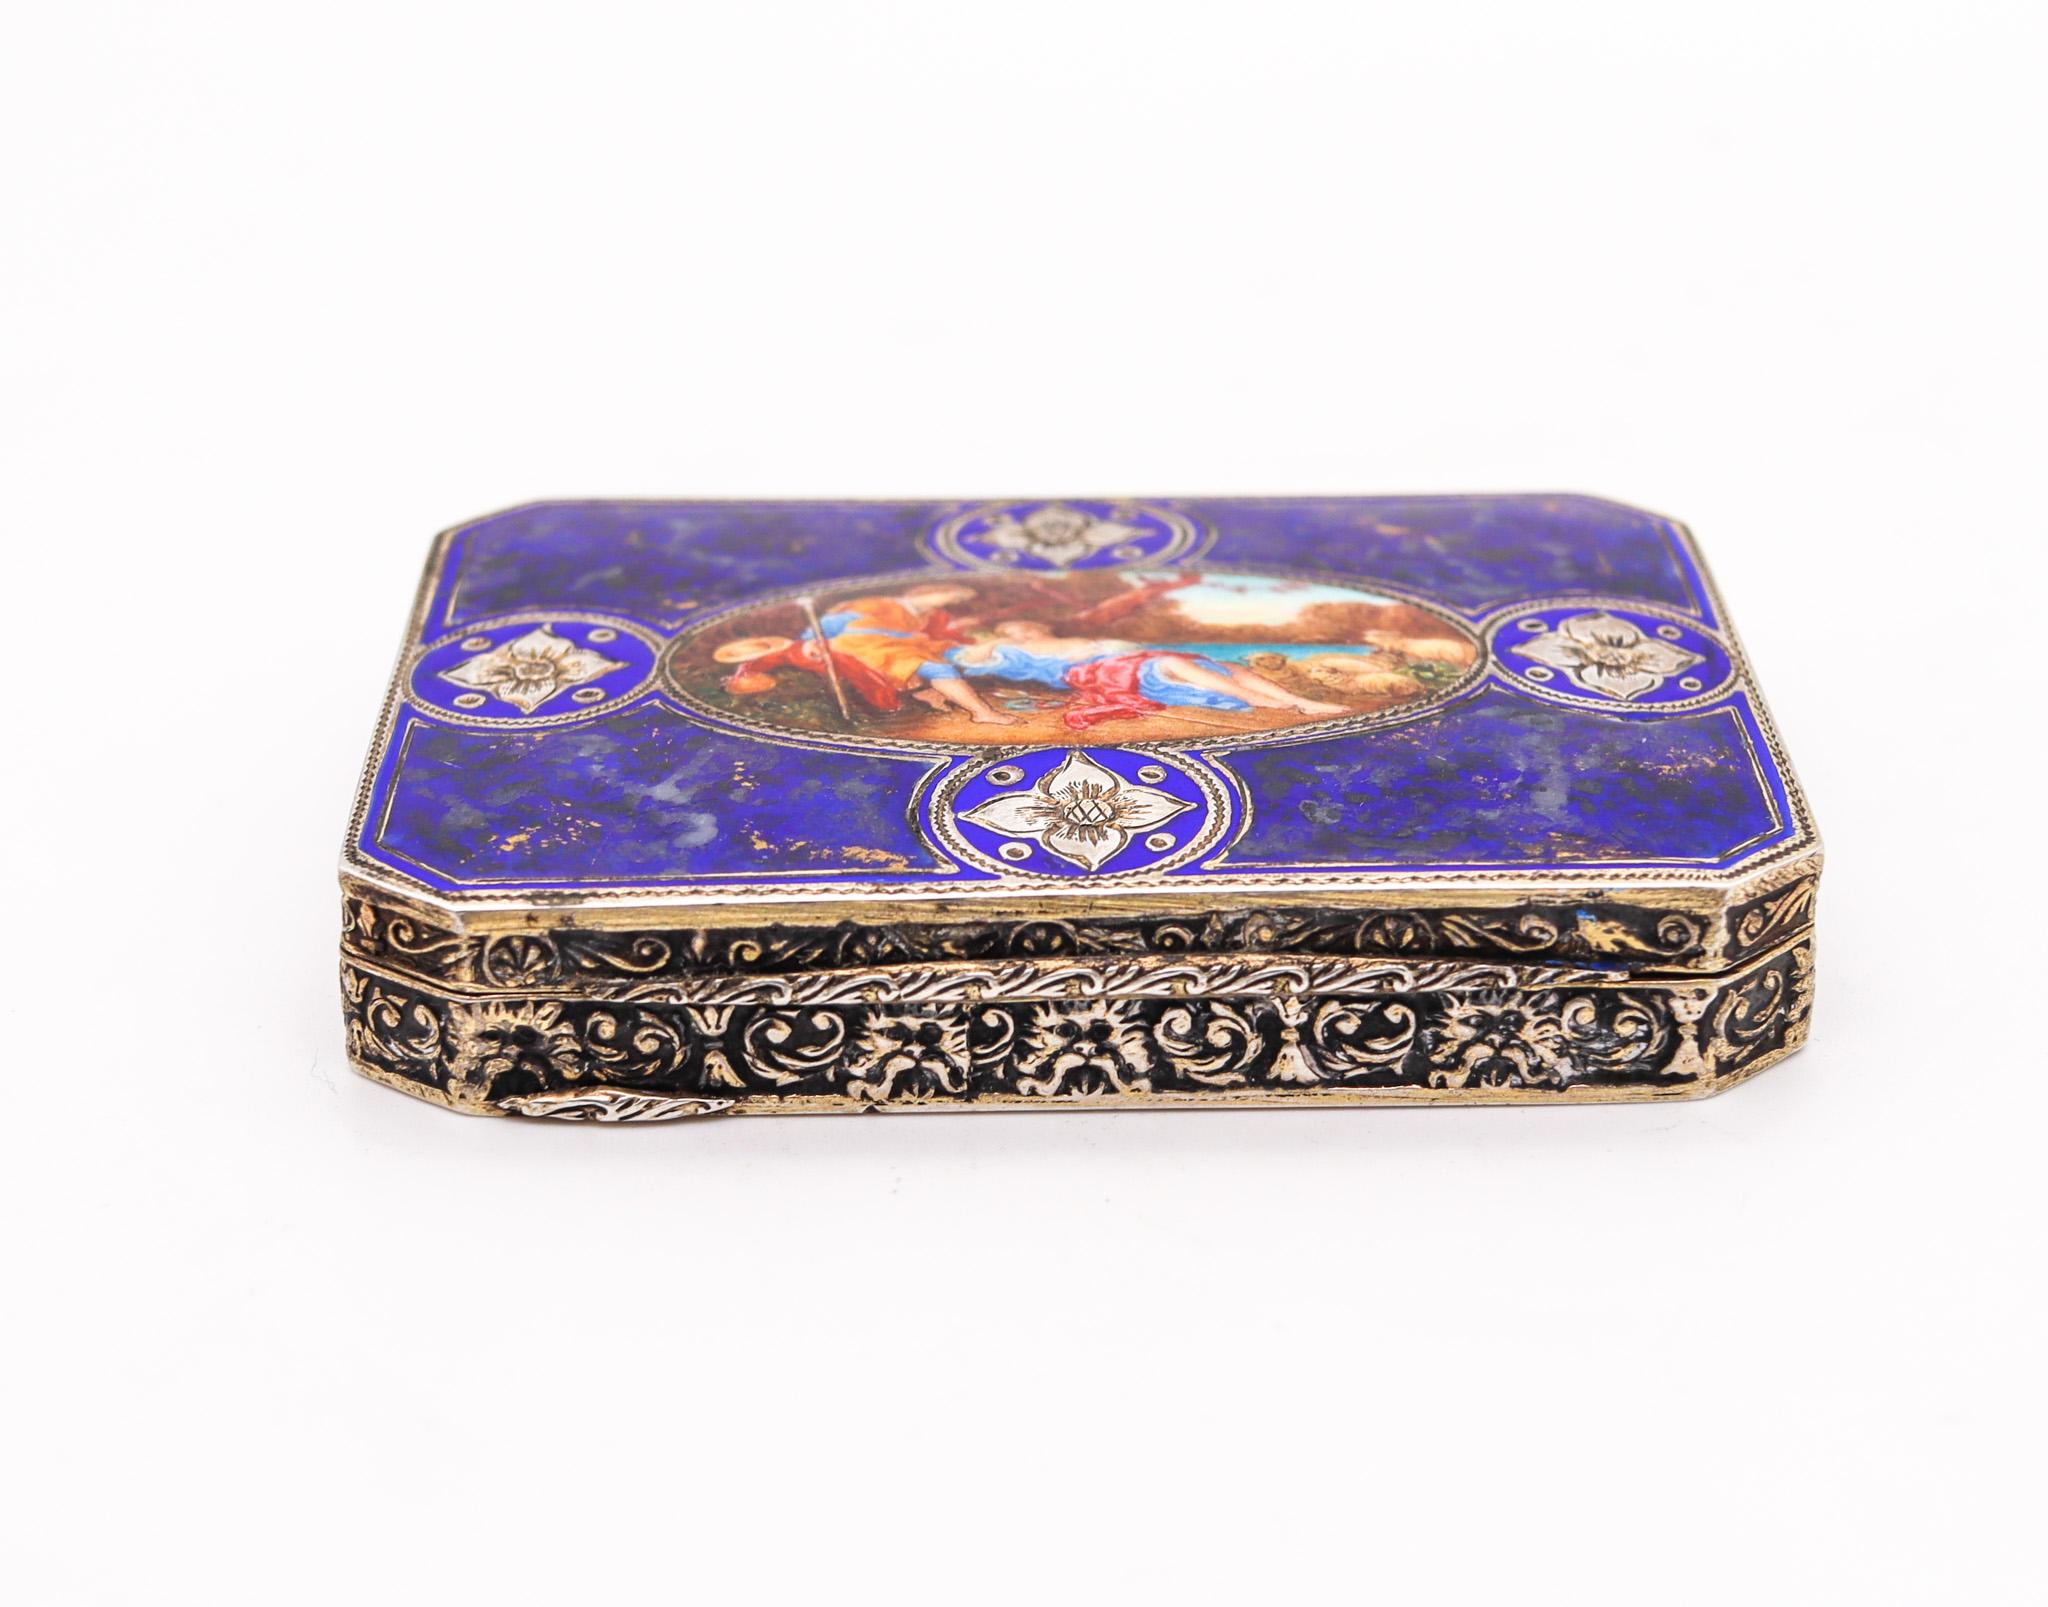 Italian 1920 Renaissance Revival Enameled Octagonal Box in .800 Silver In Excellent Condition For Sale In Miami, FL